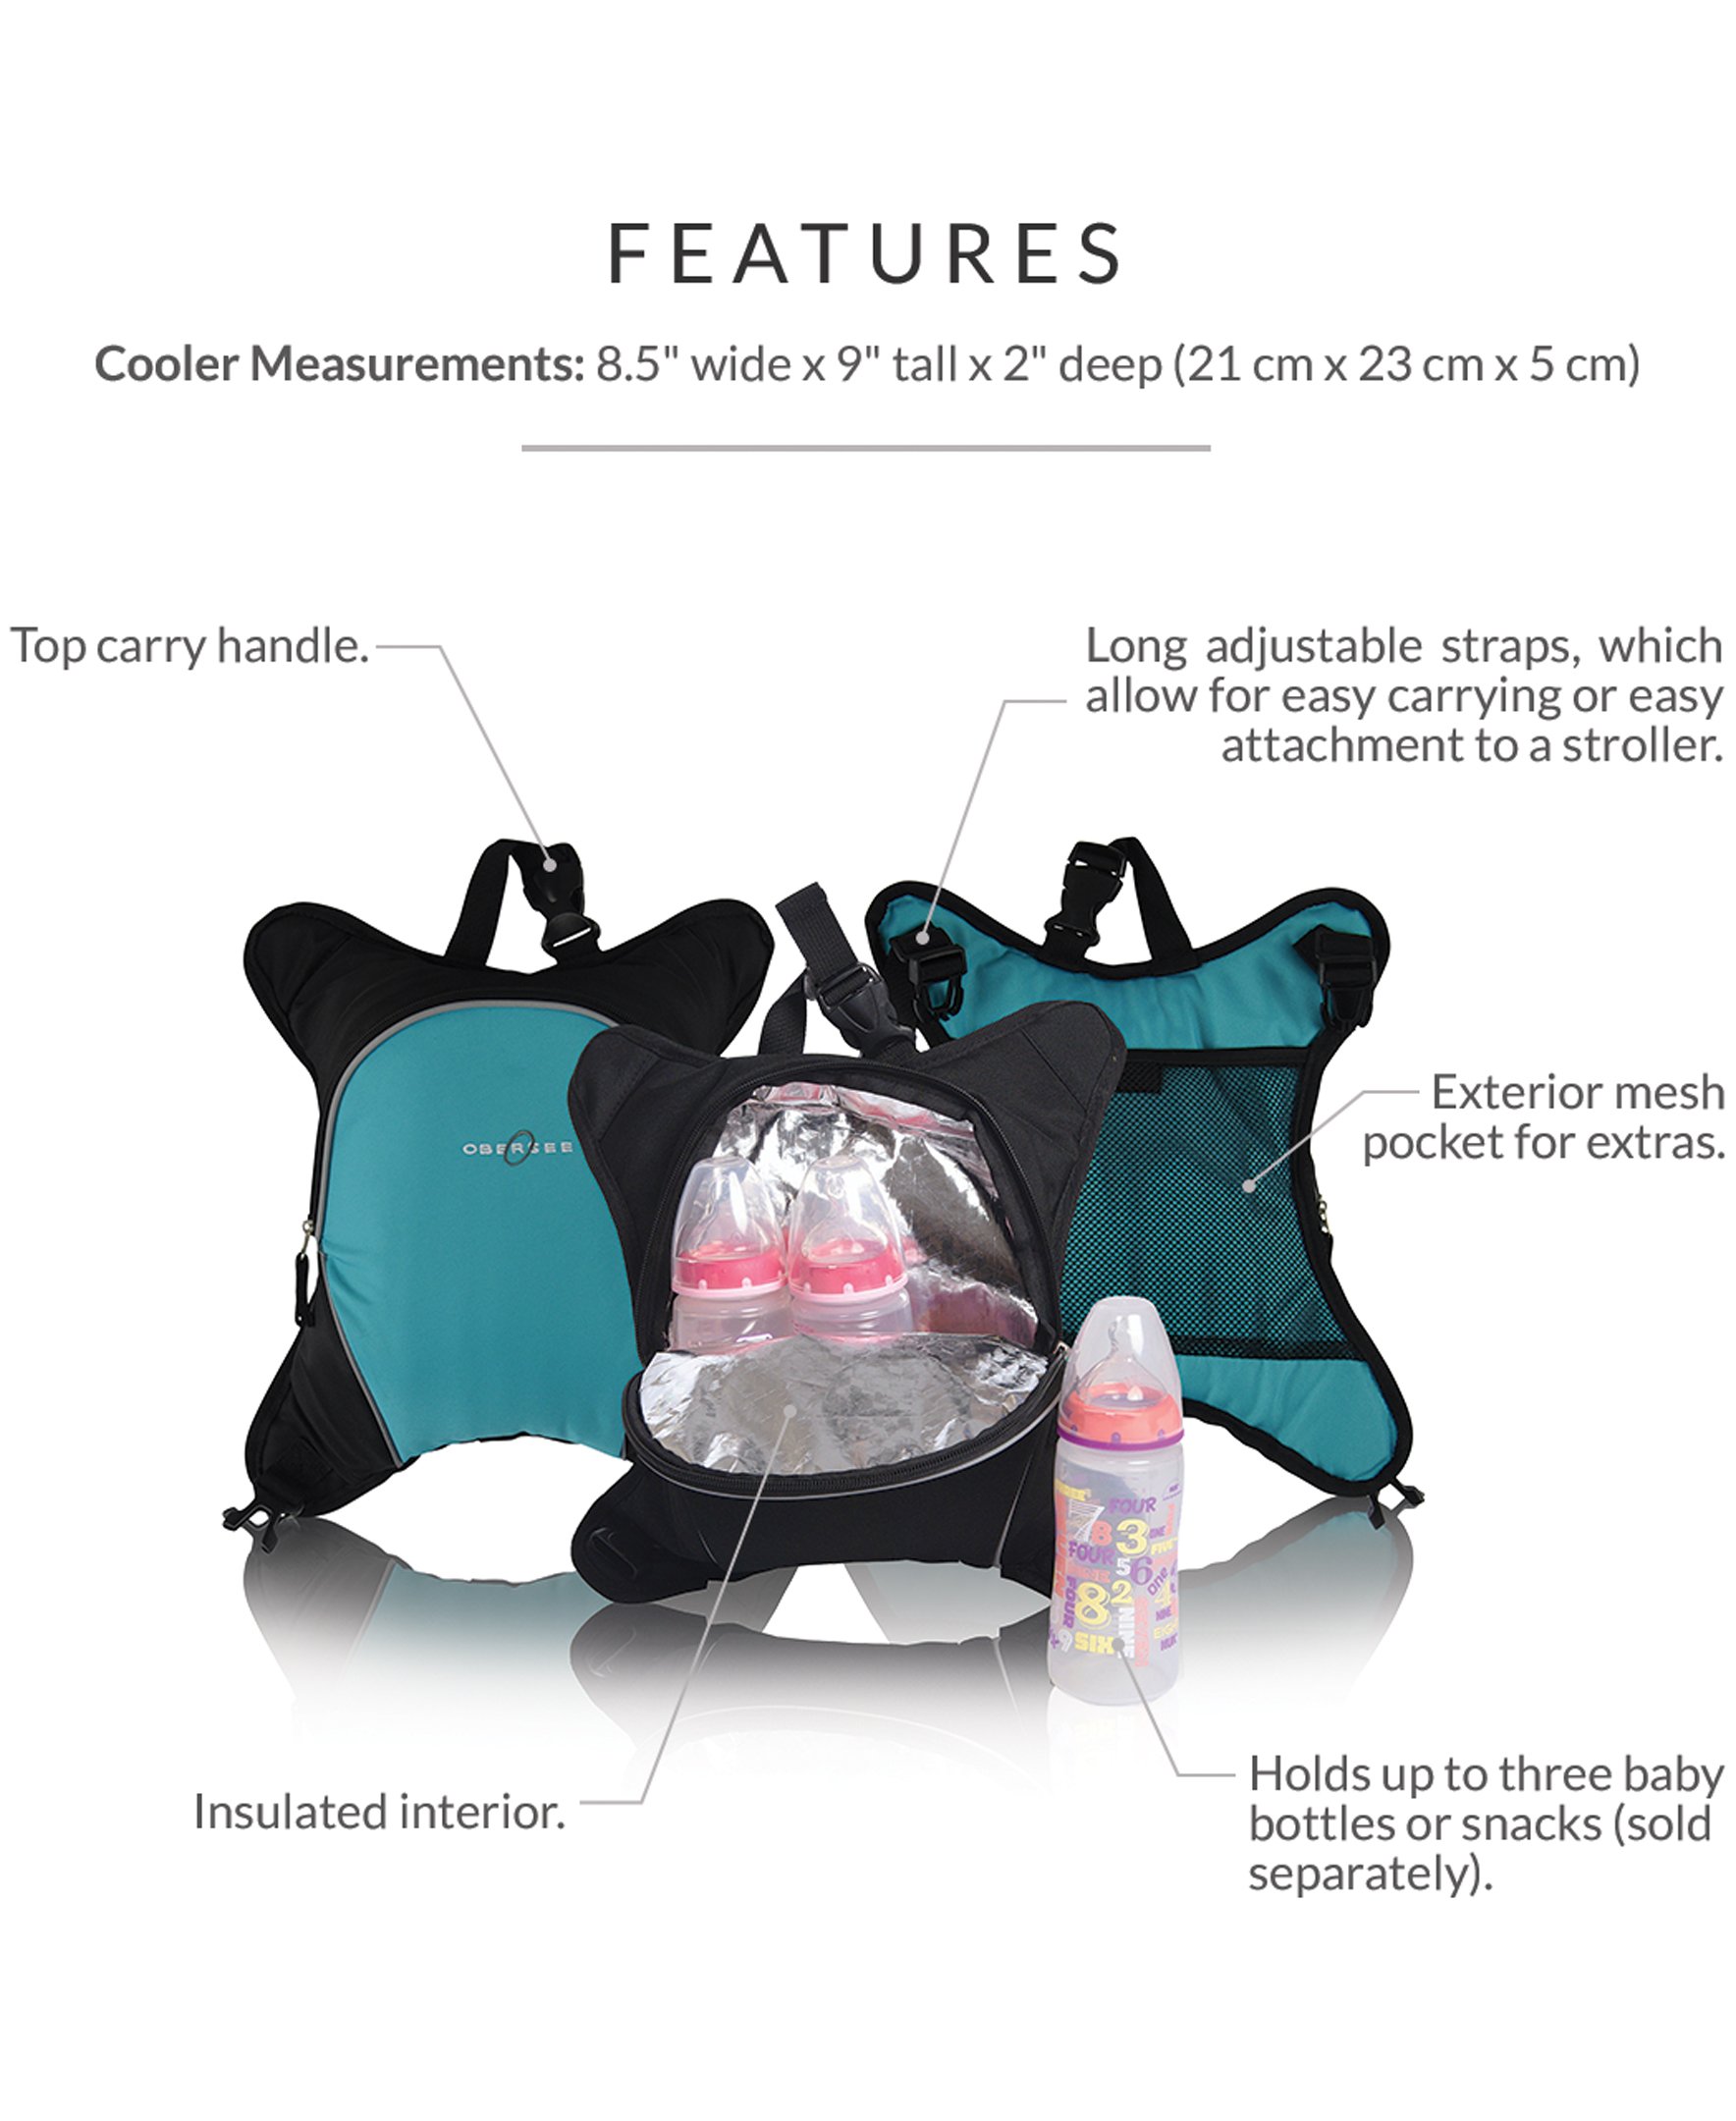 Obersee Oslo Diaper Bag Backpack | Detachable Baby Bottle Snack Cooler | Viola Baby changing kit | clothing cube | wet pouch - image 5 of 11